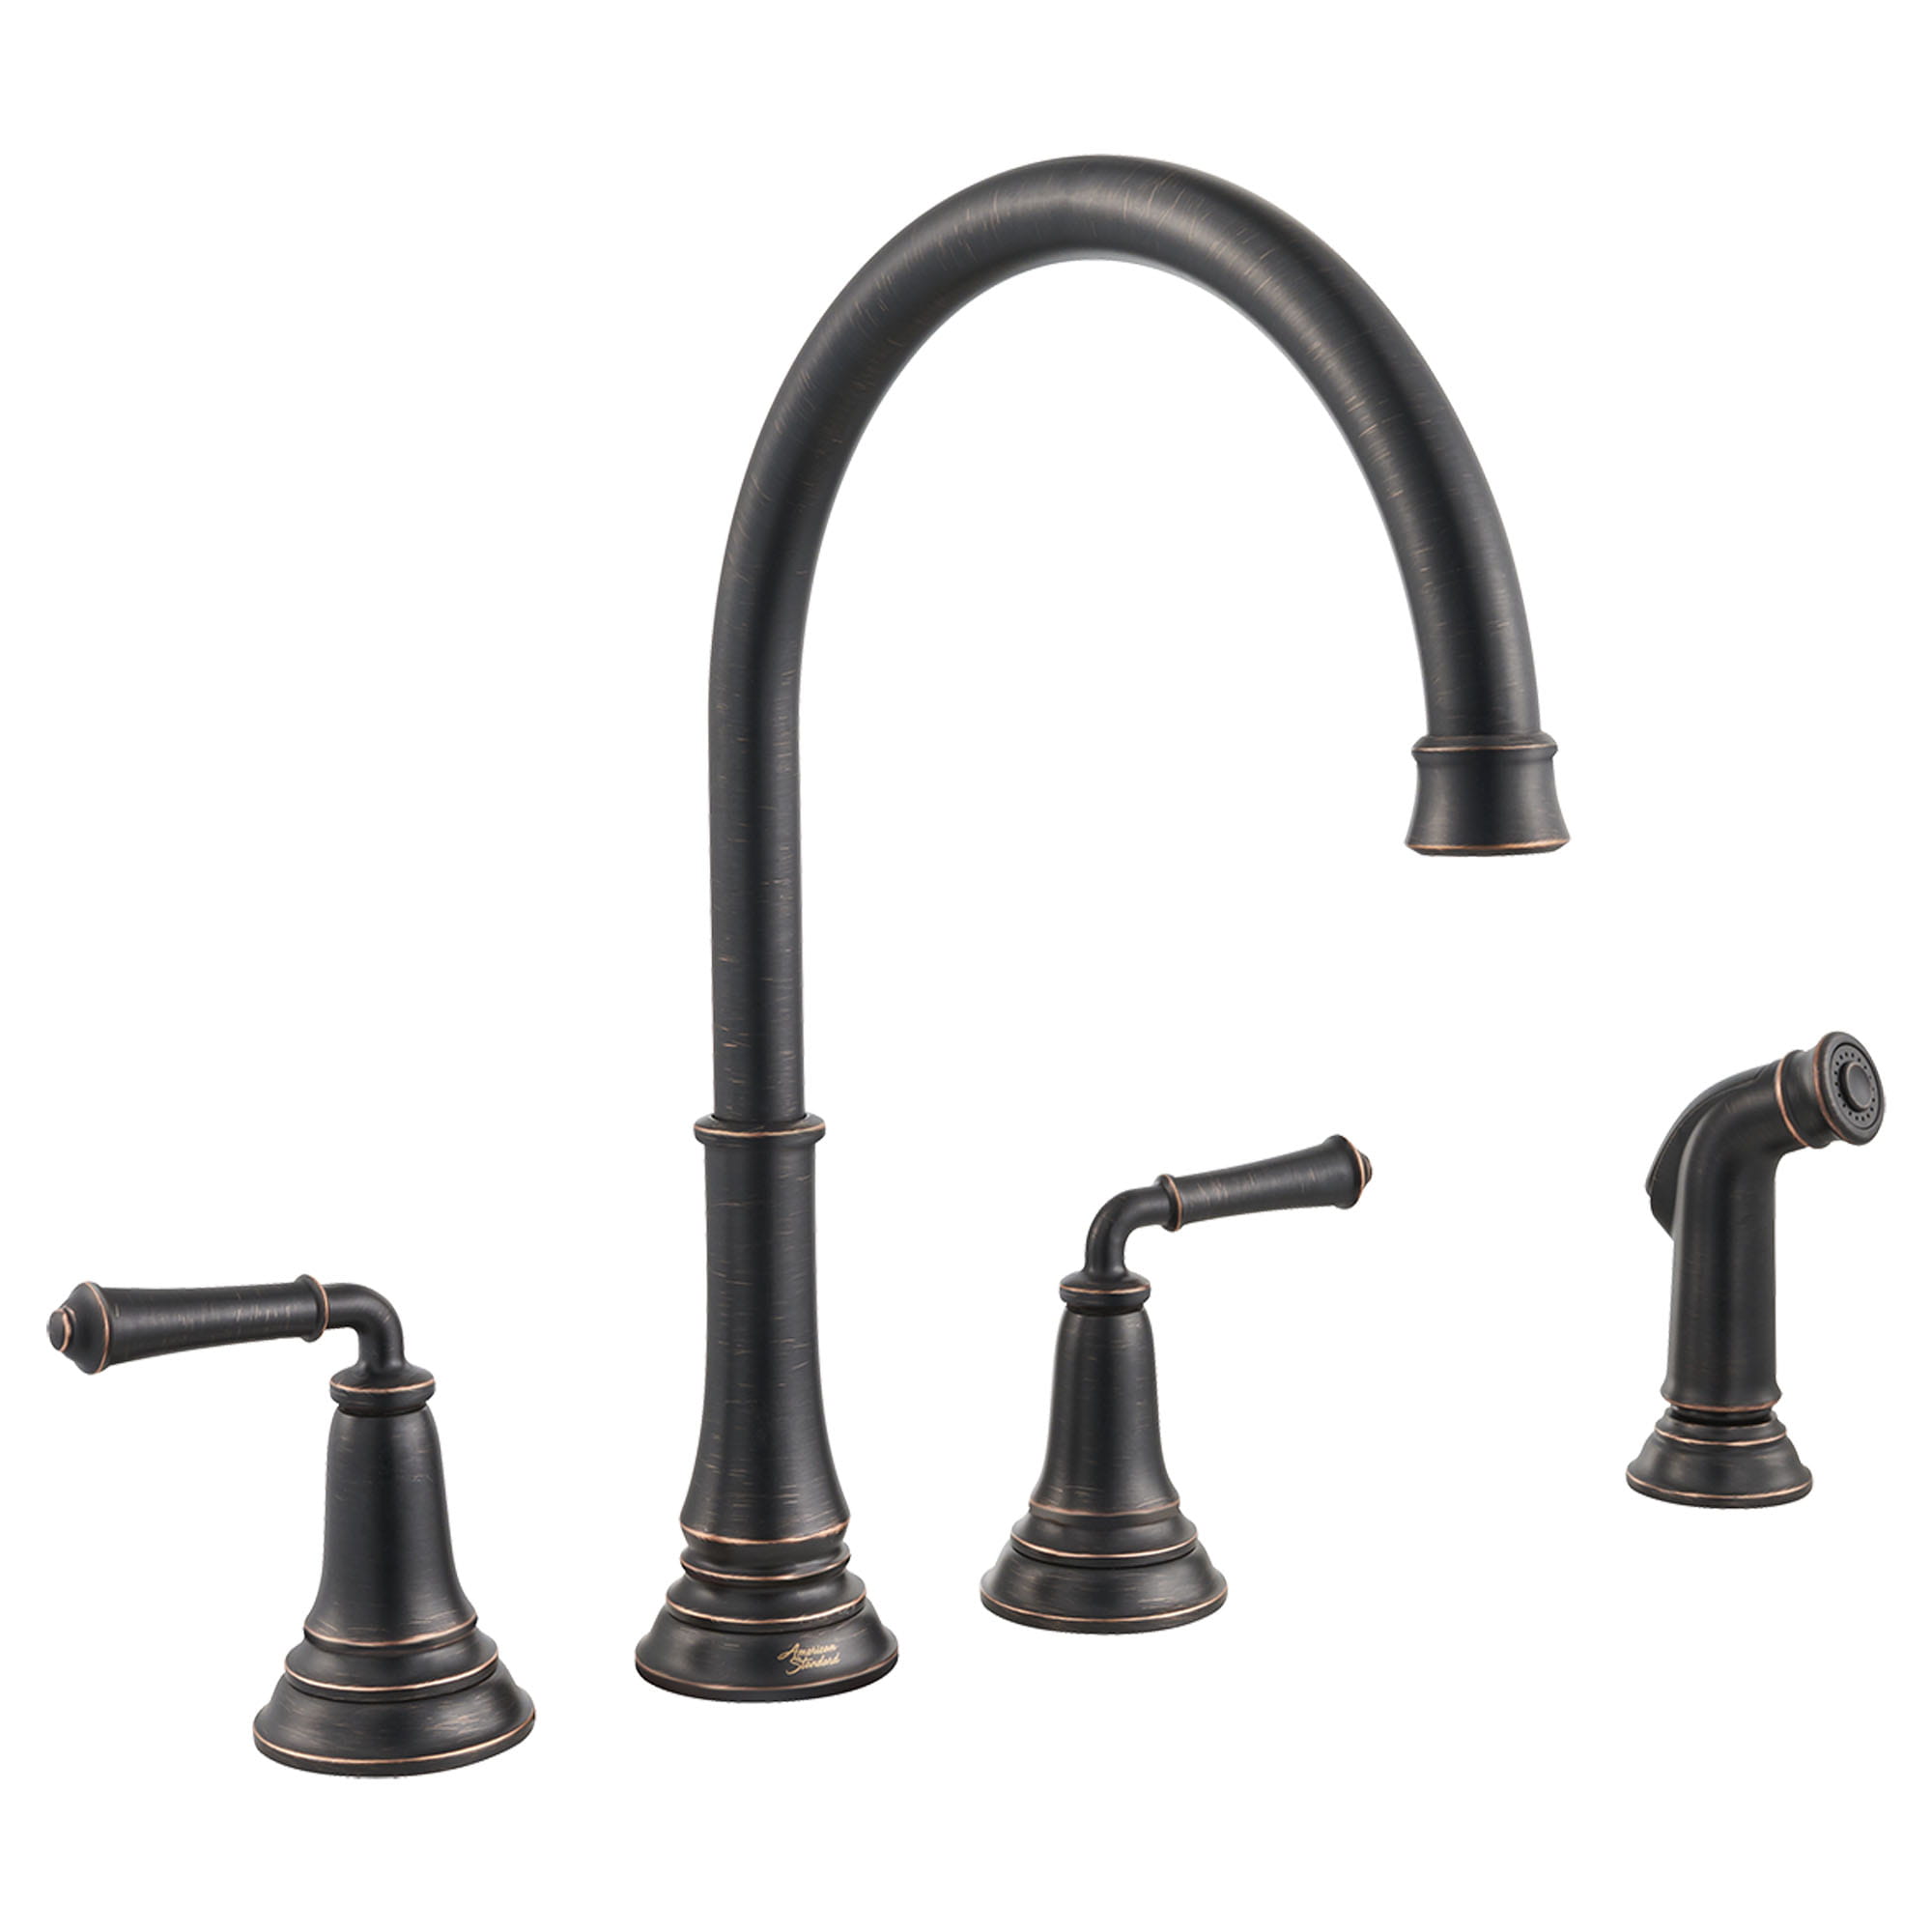 Delancey 2 Handle Widespread Kitchen Faucet 15 gpm 57 L min With Side Spray LEGACY BRONZE